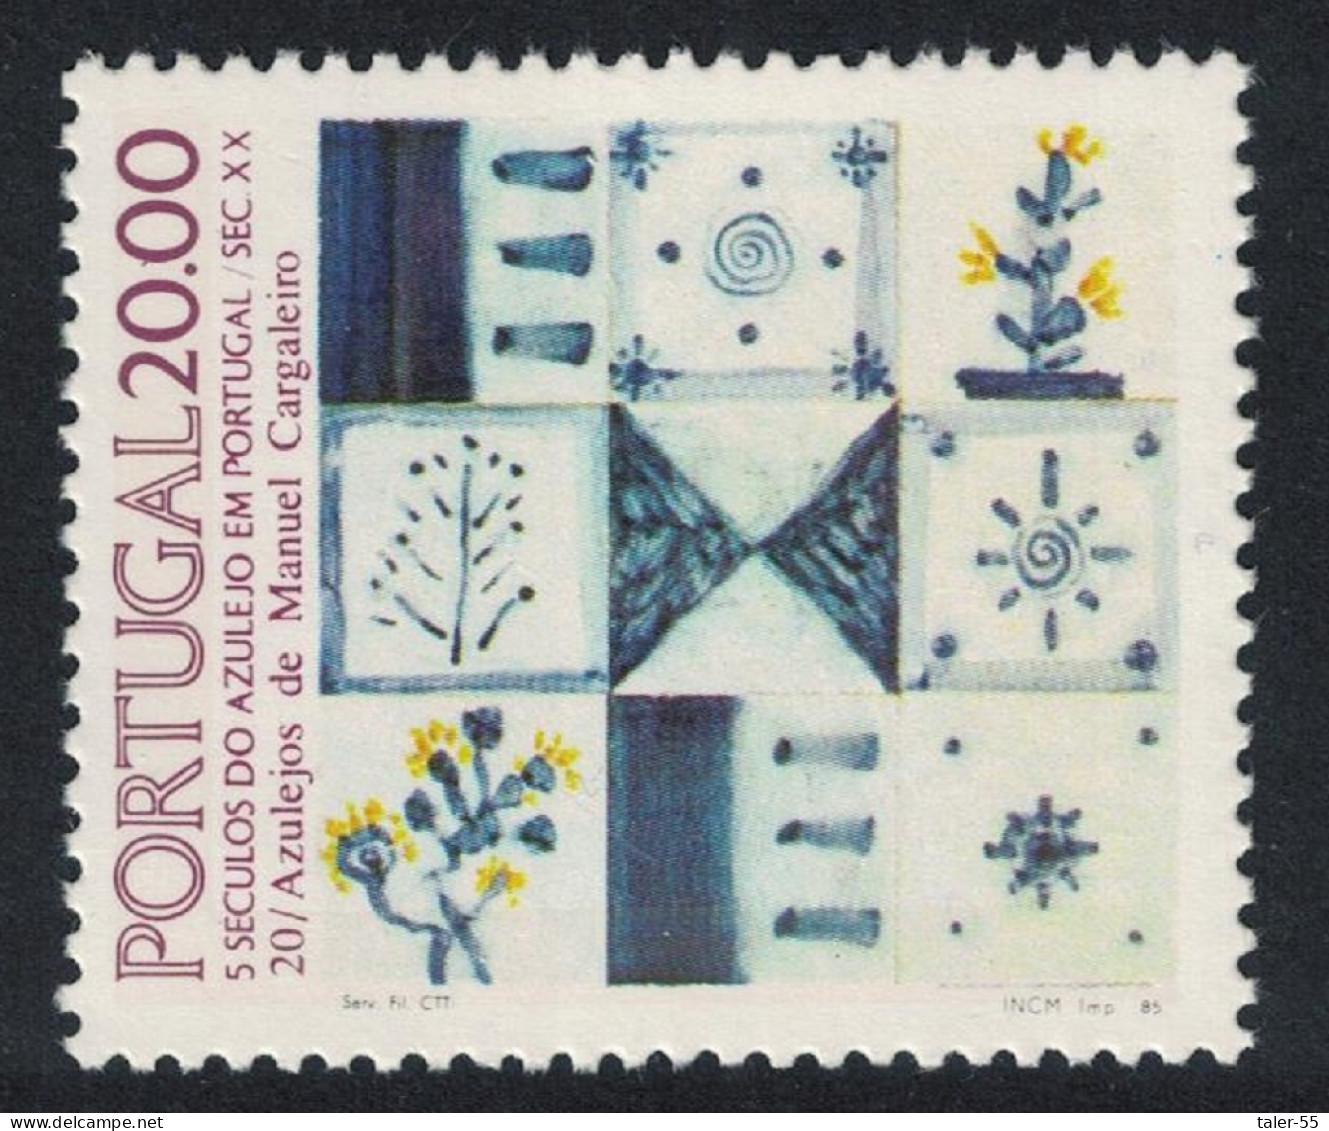 Portugal Tiles 20th Series 1985 MNH SG#2031 - Unused Stamps